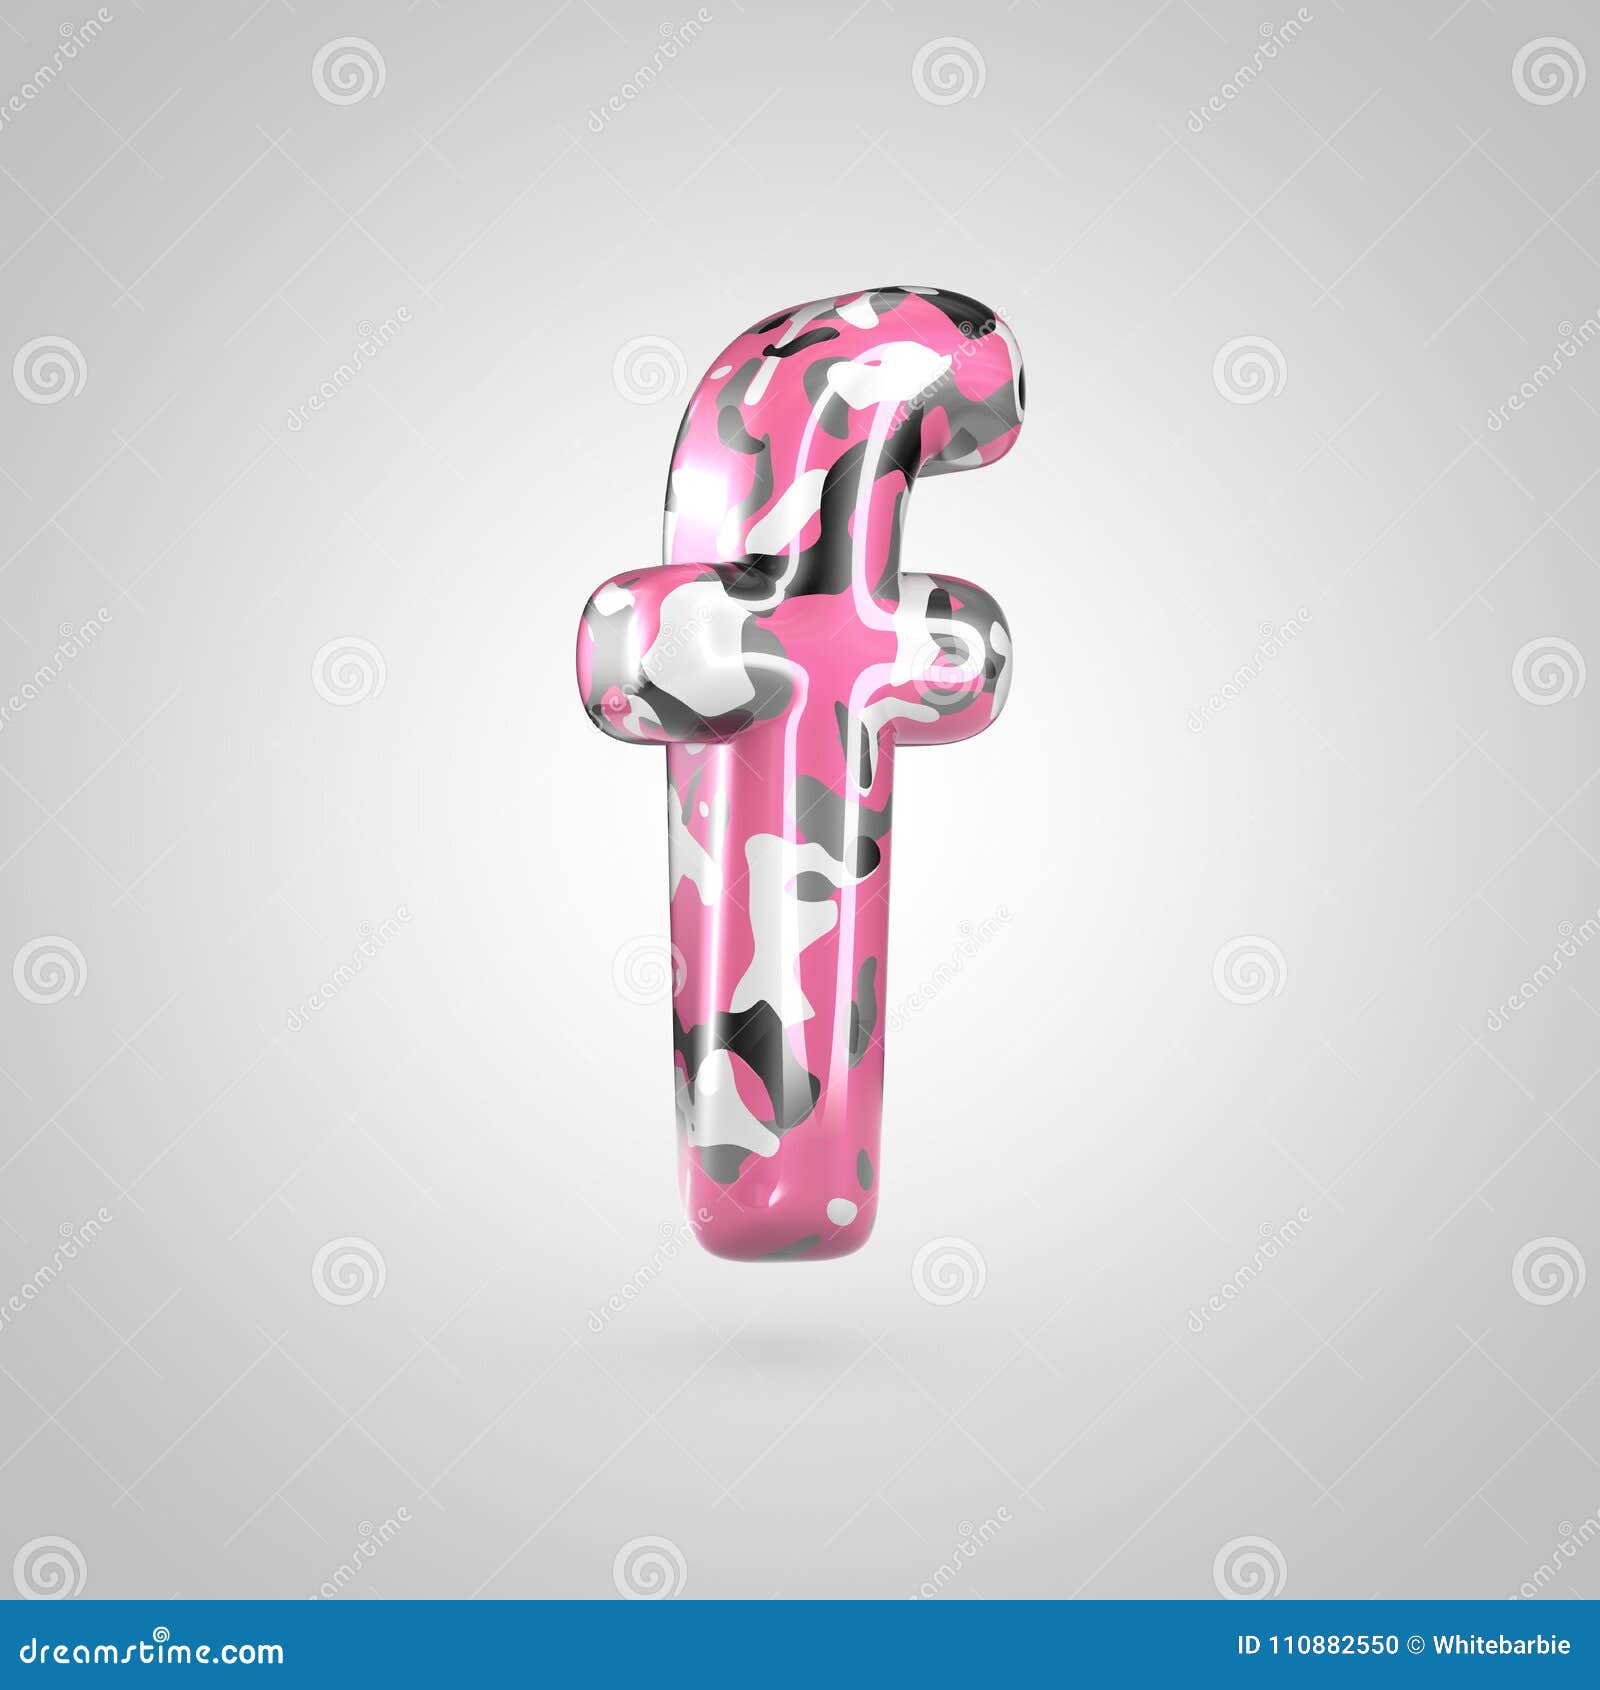 Camouflage Letter F Lowercase With Pink Grey Black And White